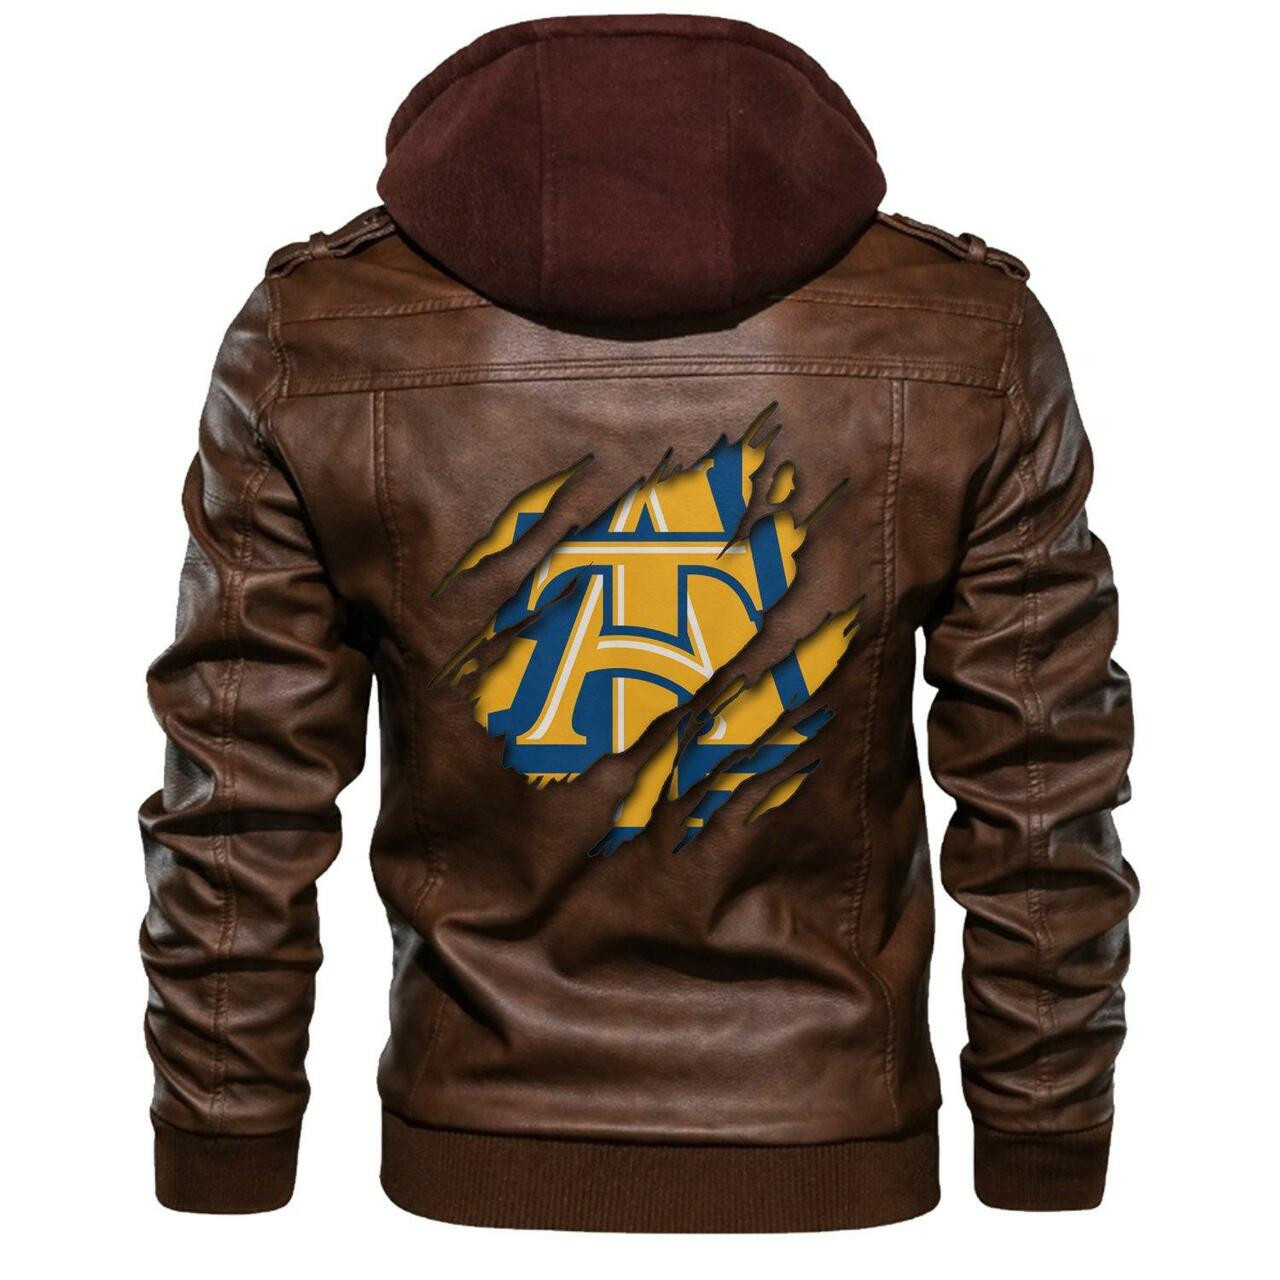 These Amazing Leather Jacket will add to the appeal of your outfit 339